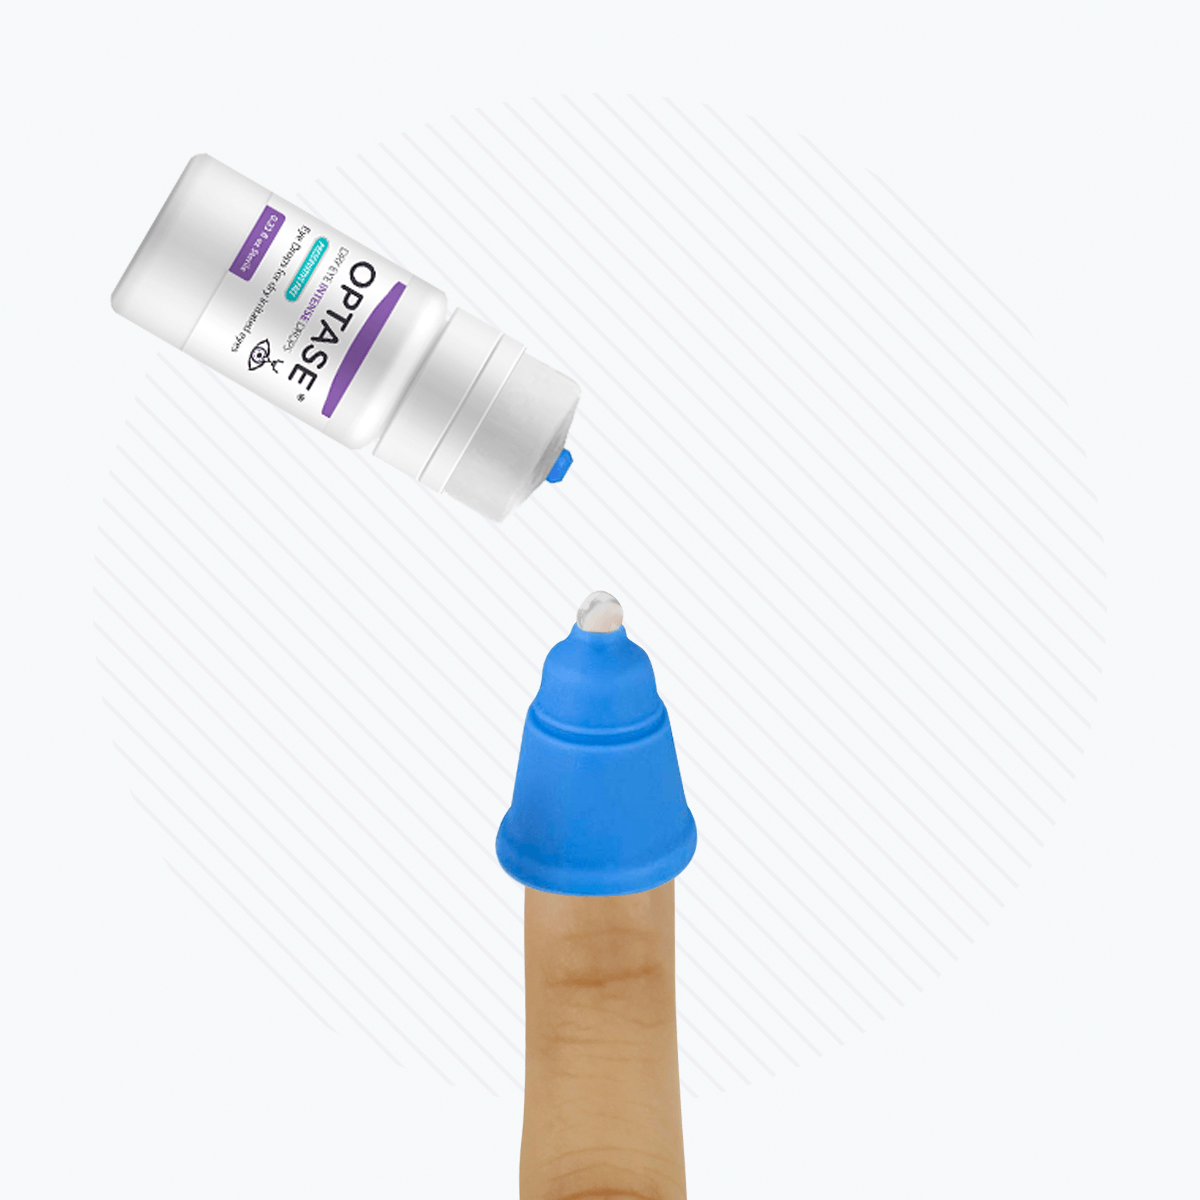 Optase Intense Preservative Free with Magic Touch Applicator - DryEye Rescue Store